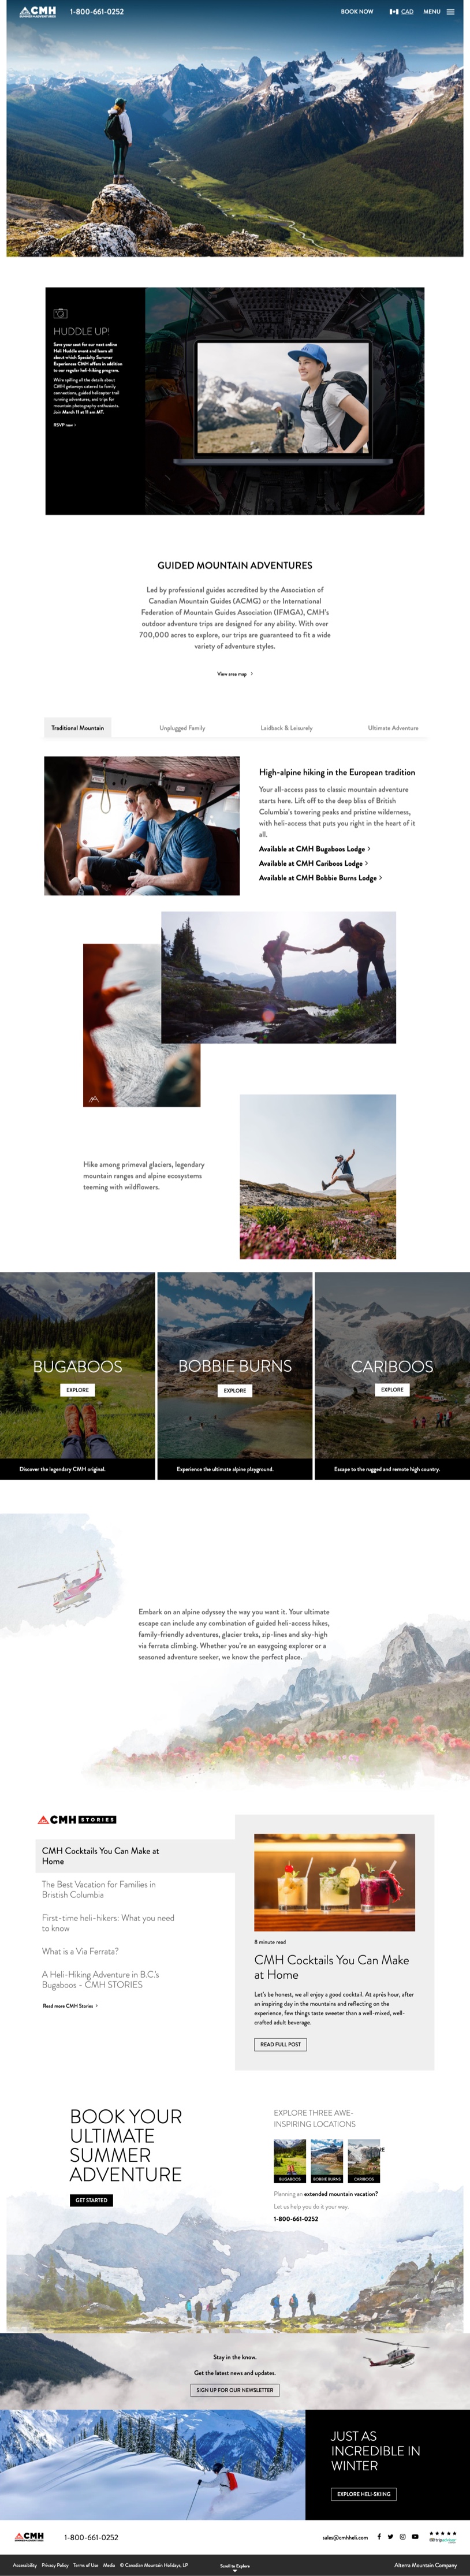 A scrollable version of the CMH home page details the mountain adventures on offer and the amenities found at the company's backcountry lodges. 